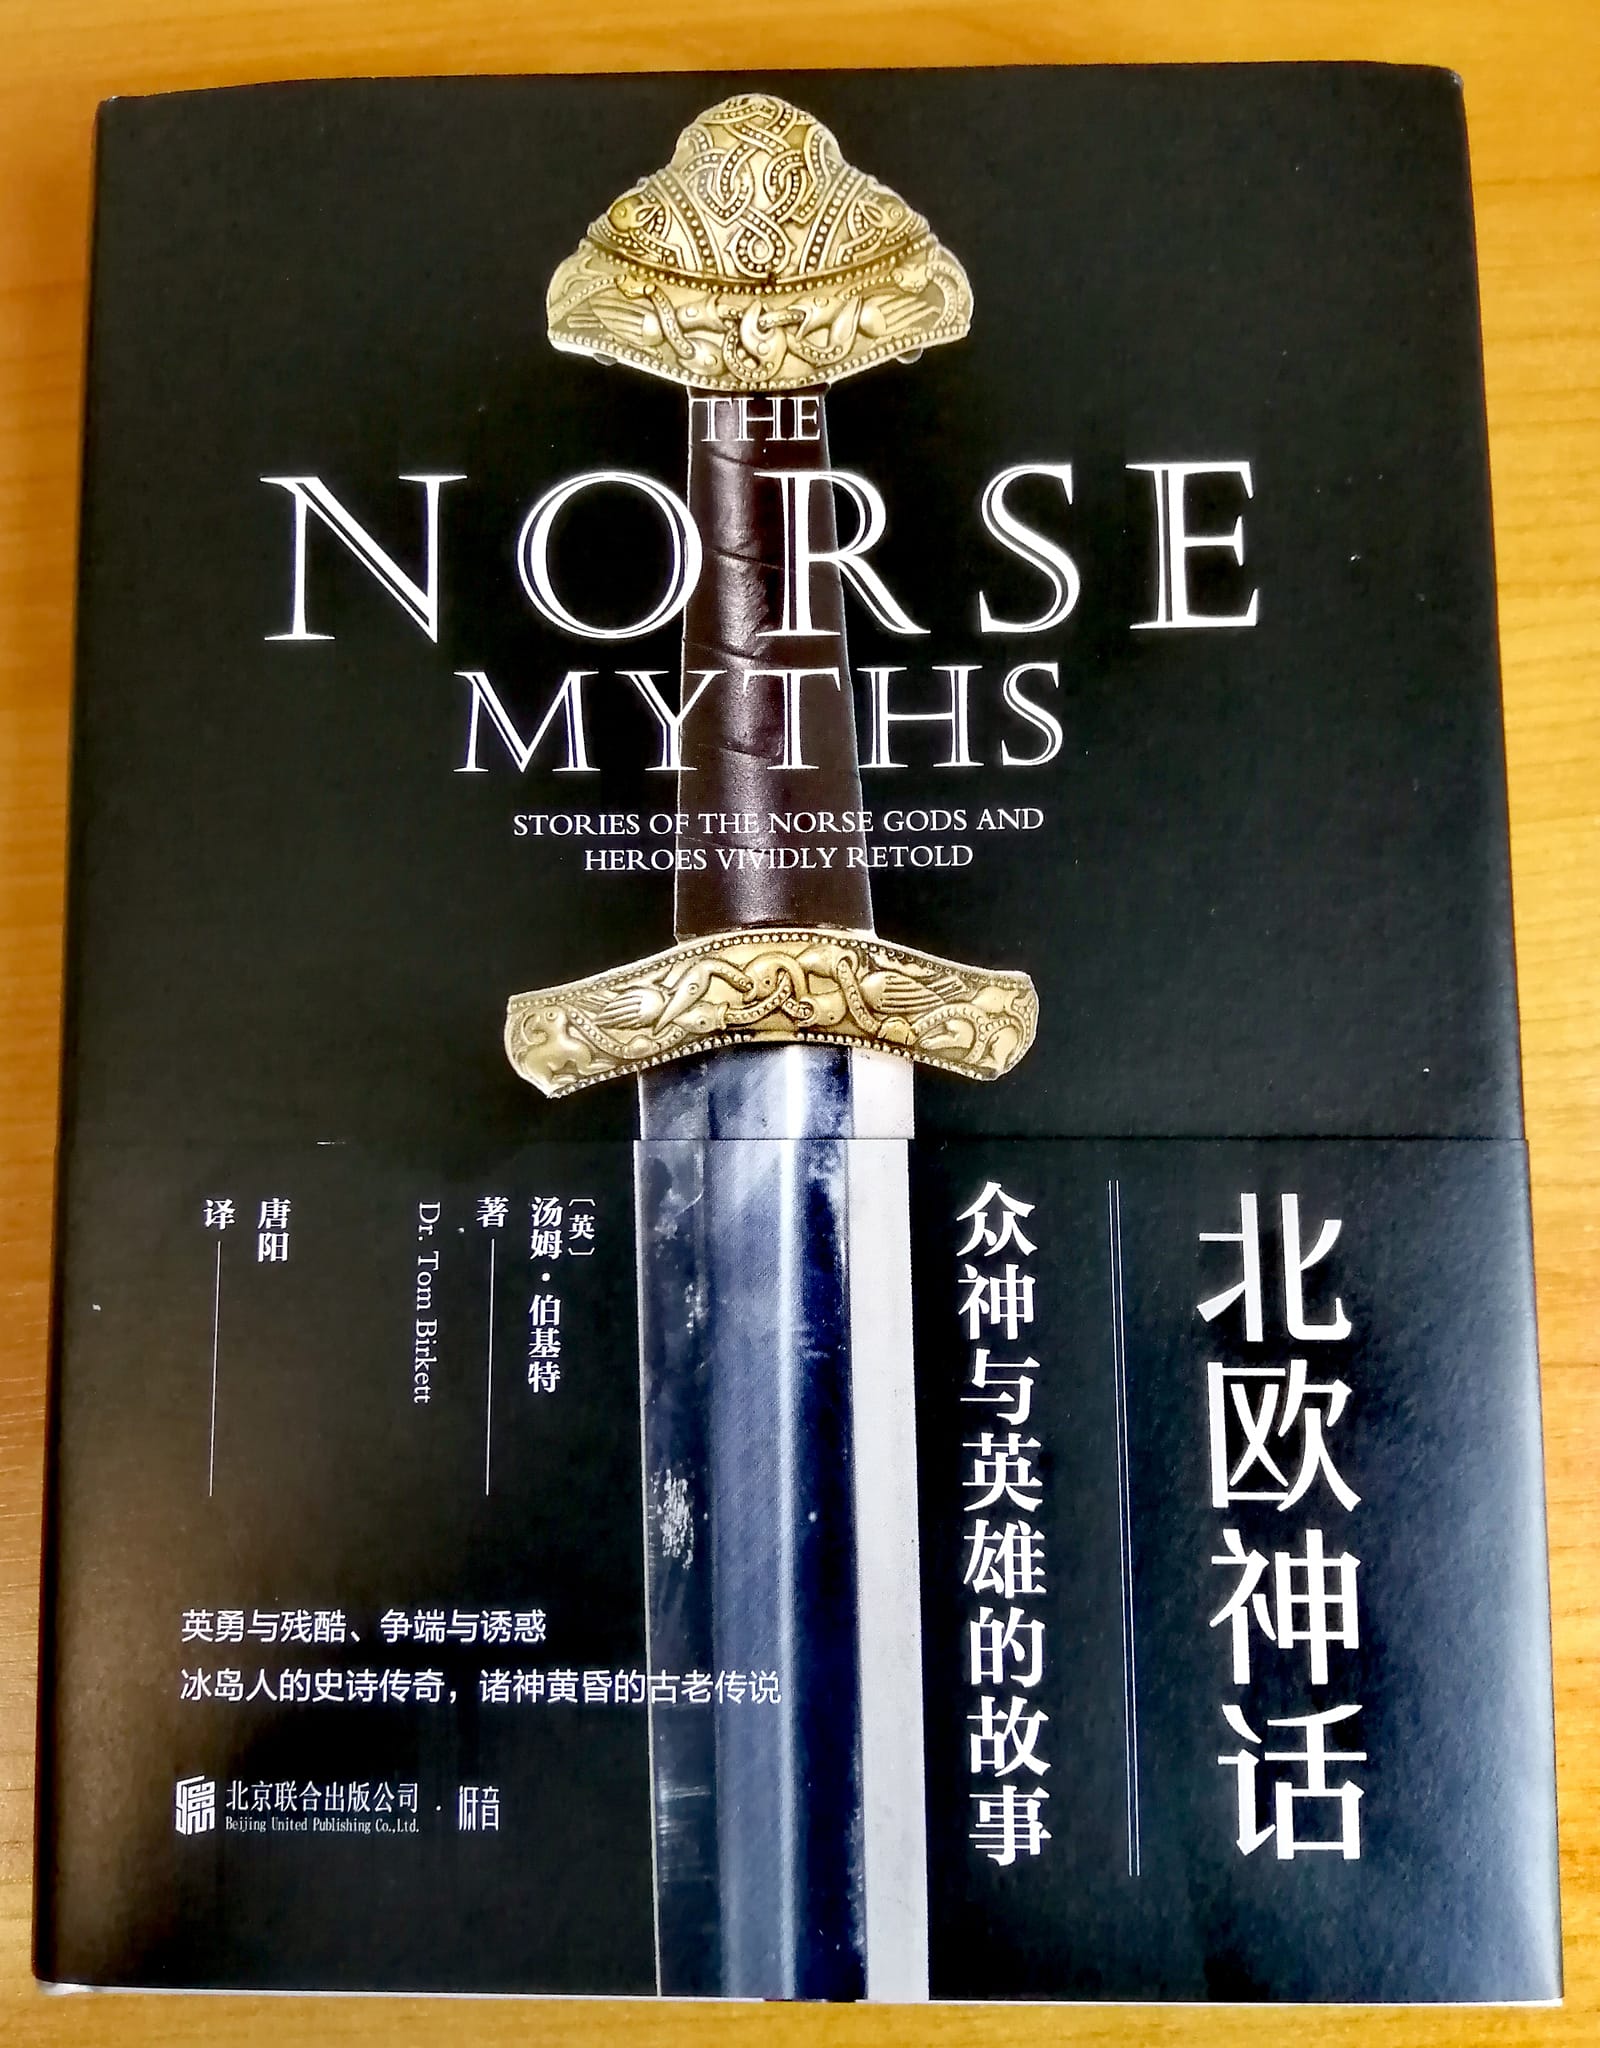 Staff Member's retelling of Norse Myths released in a new Chinese translation